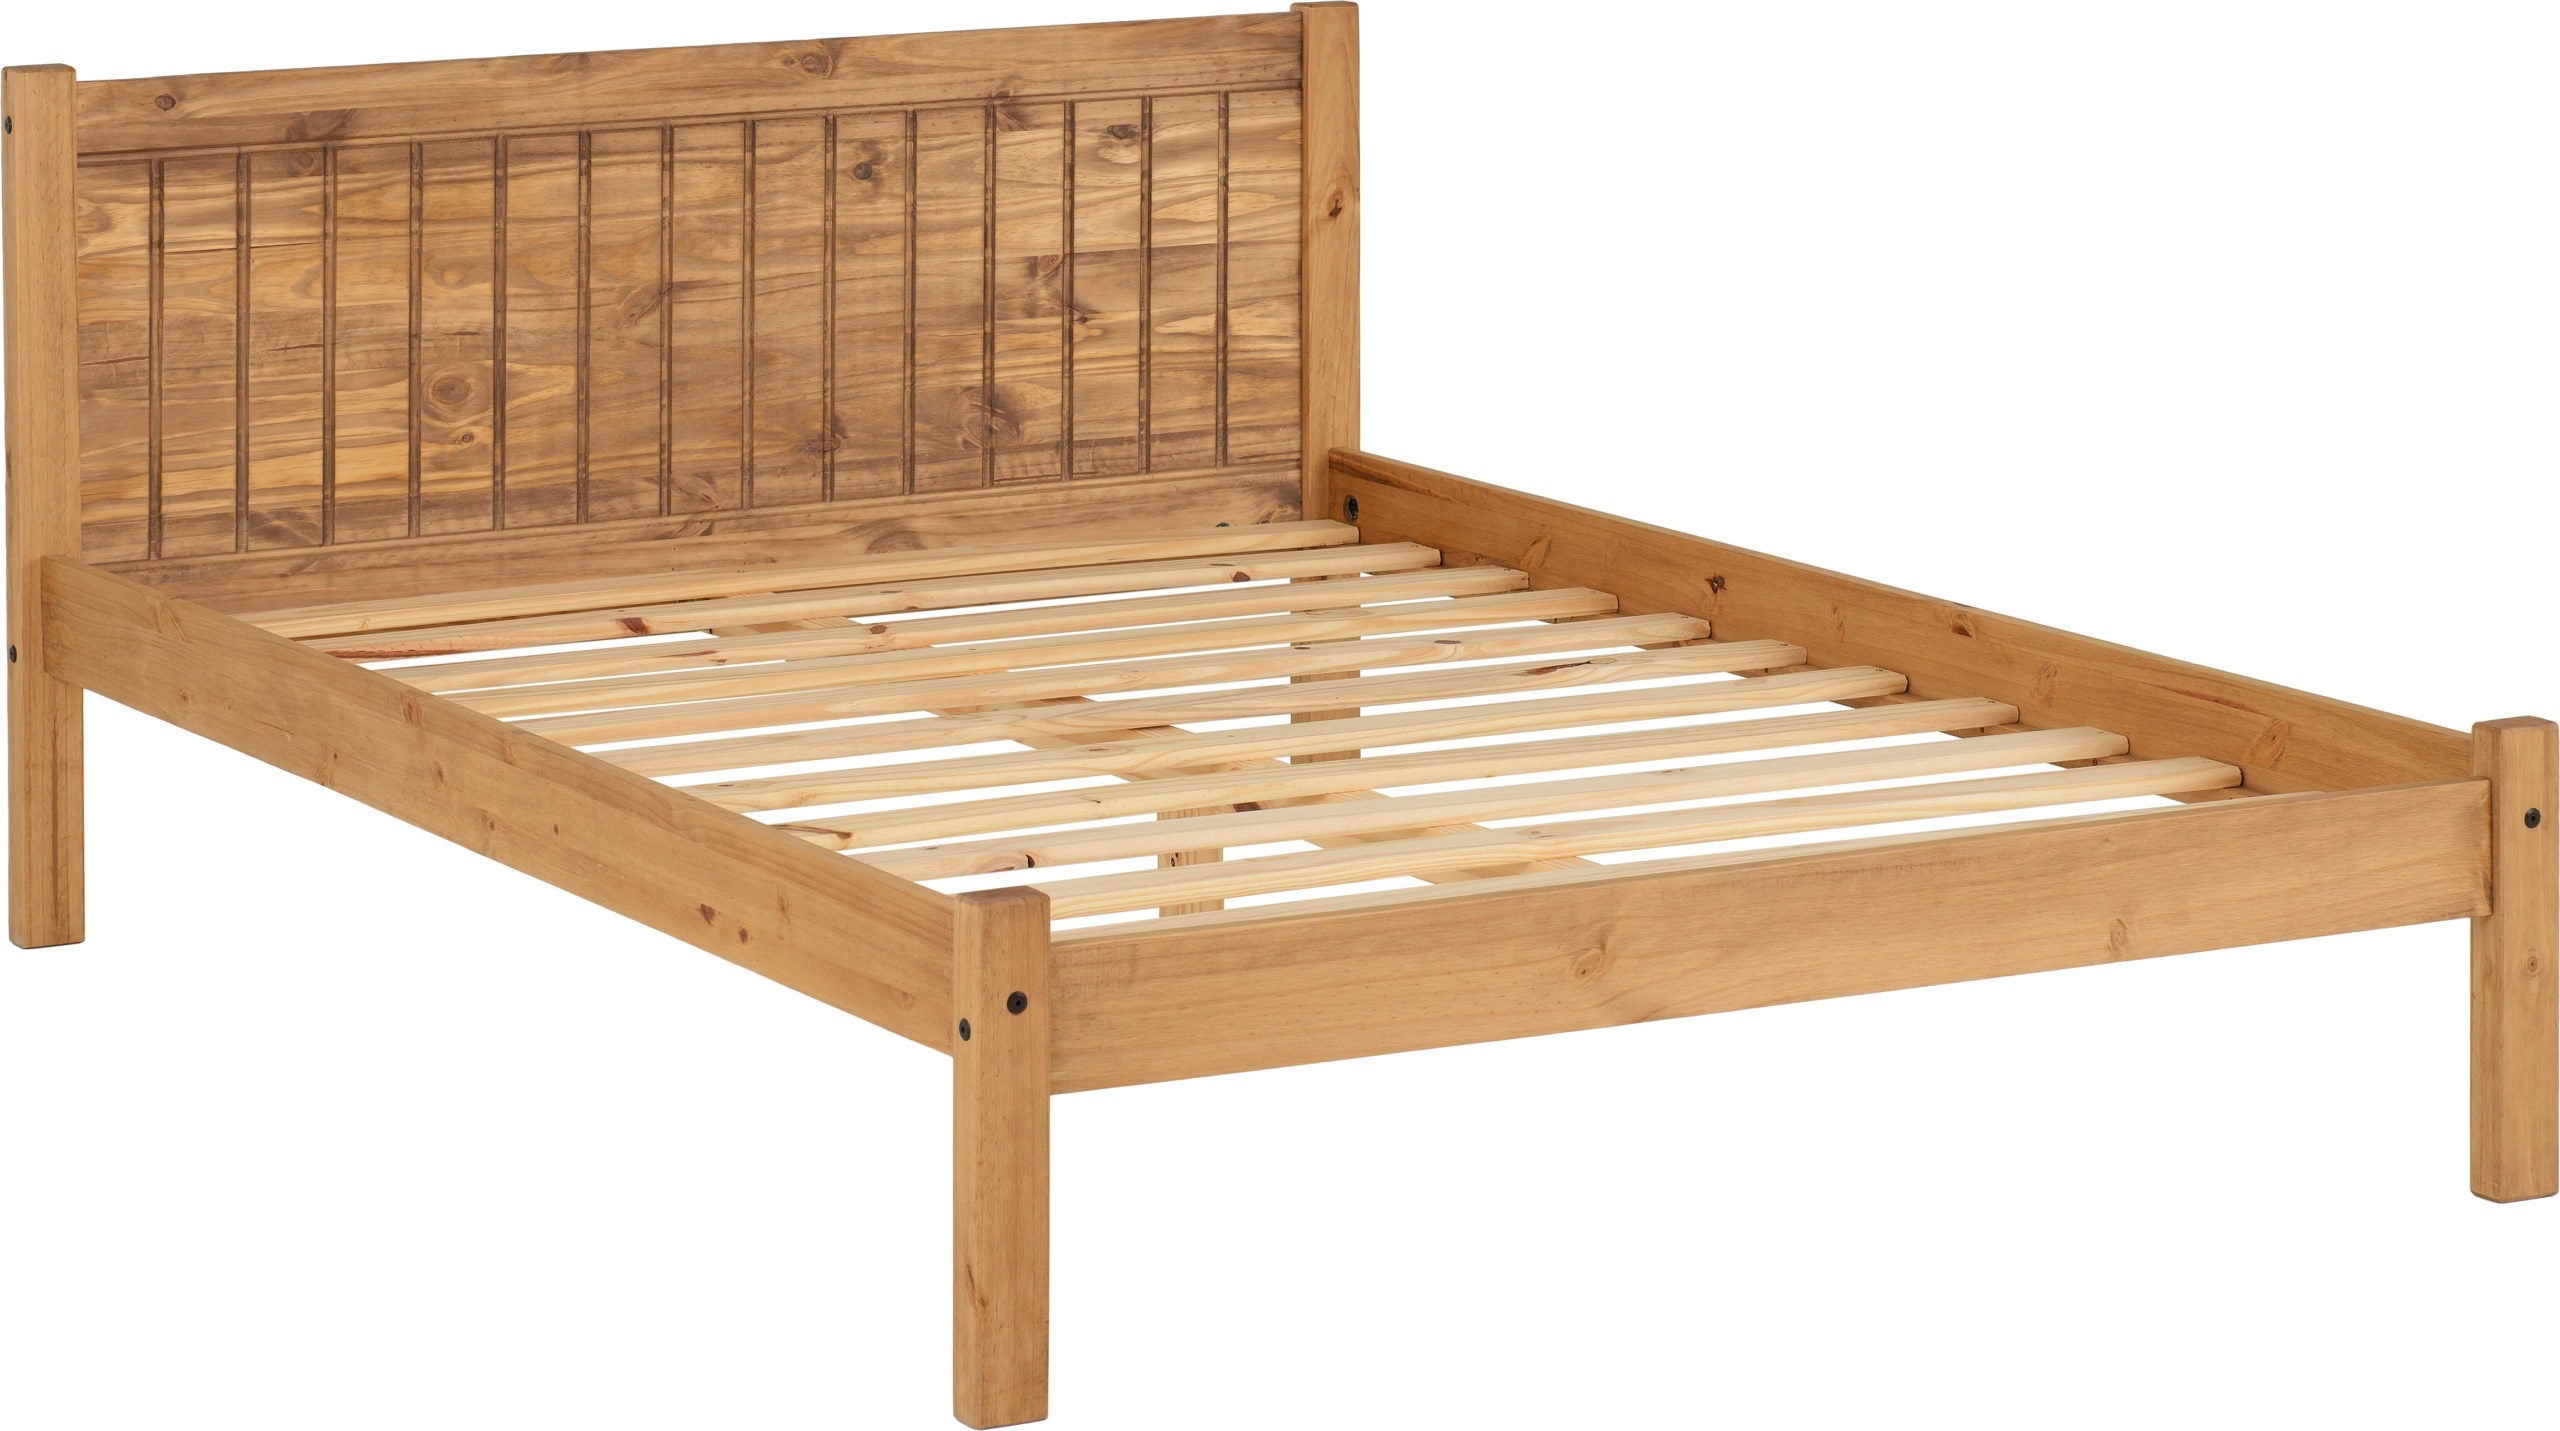 MAYA SMALL DOUBLE 4ft SOLID DISTRESSED WAX PINE WOOD BED FRAME